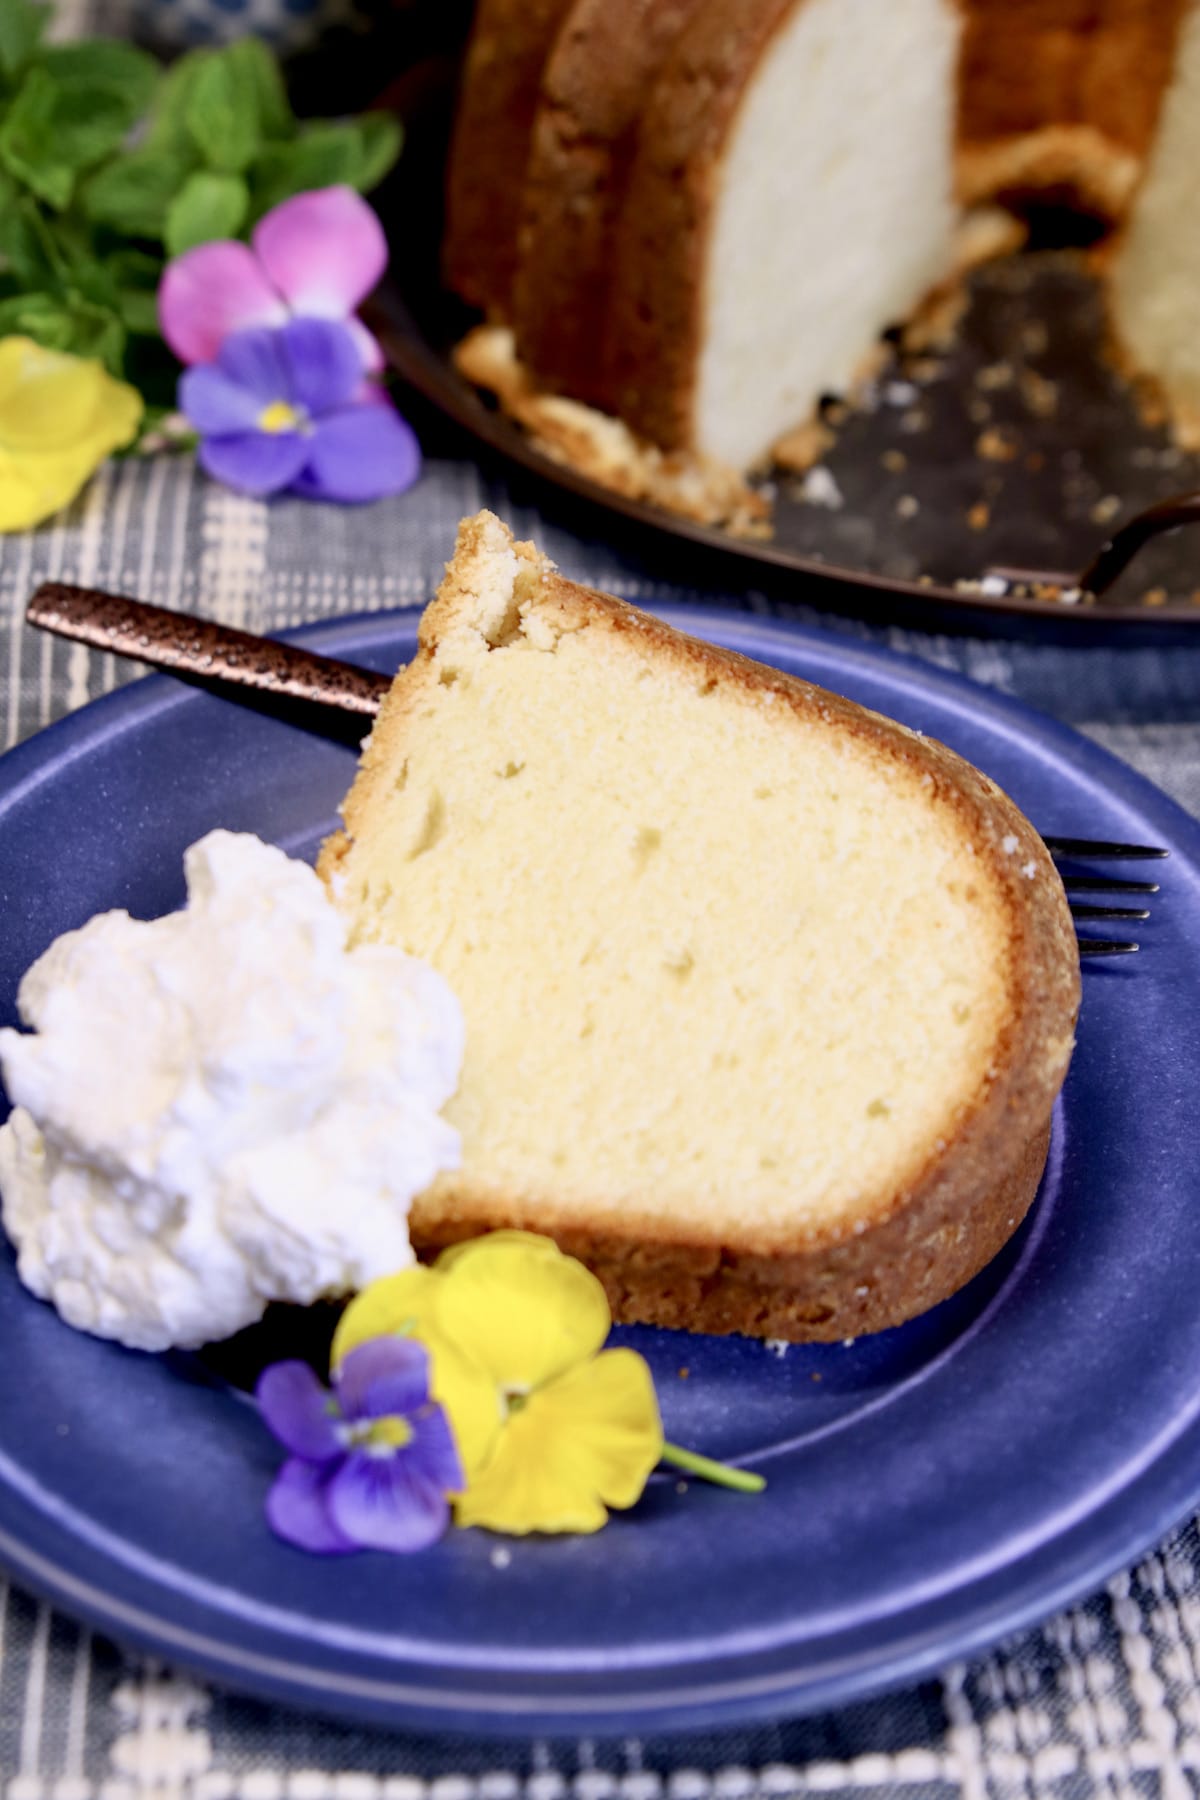 Slice of pound cake with whipped cream.